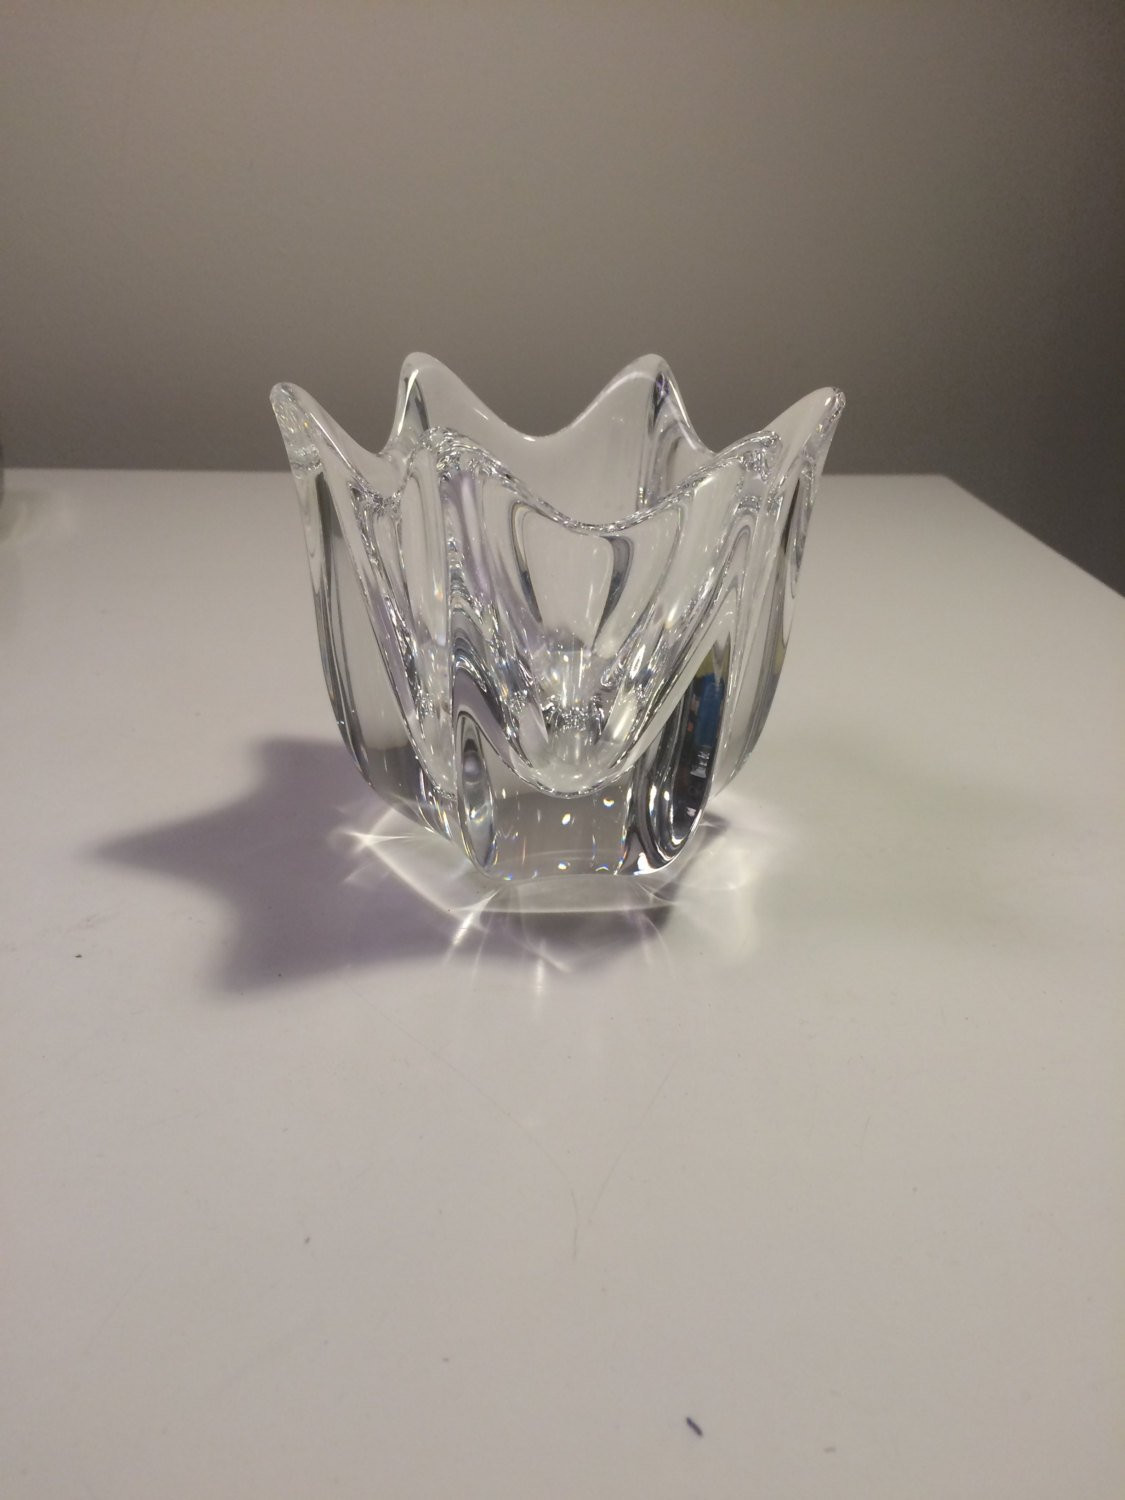 20 Perfect norleans Vase Made In Italy 2024 free download norleans vase made in italy of orrefors sweden crystal belle tulip splash round panel bowl inside dc29fc294c28ezoom